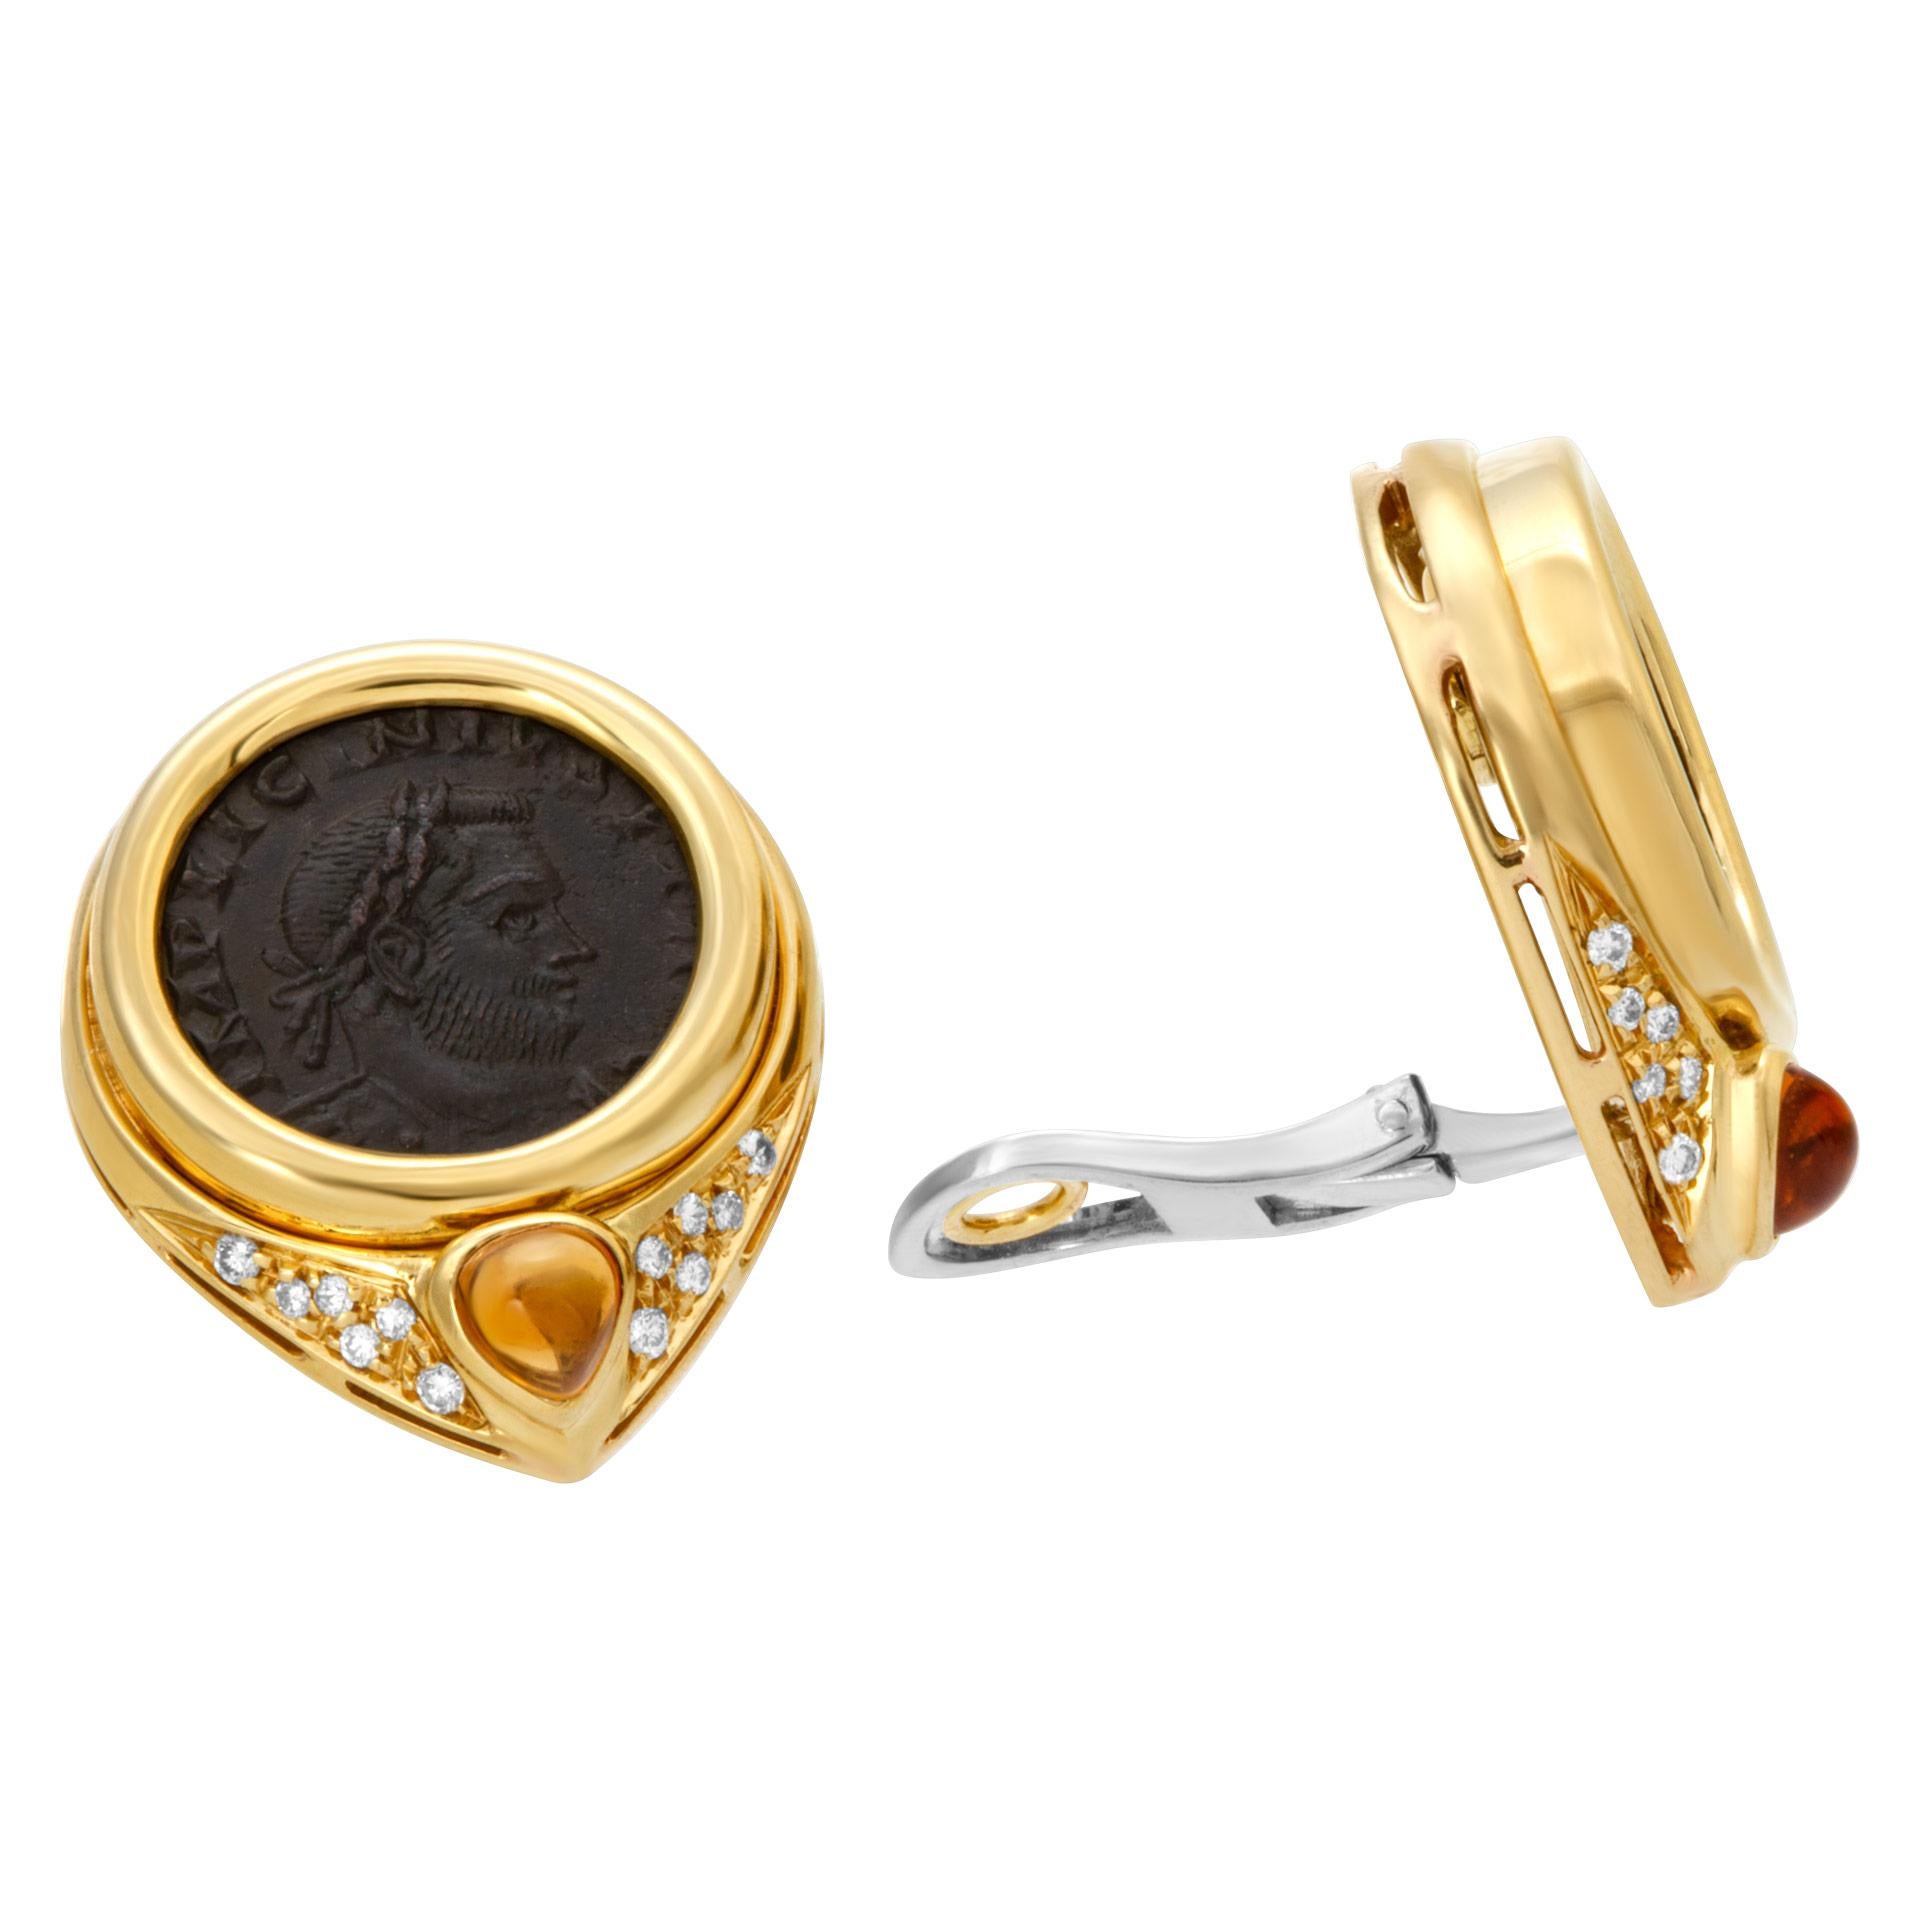 ESTIMATED RETAIL: $4,200 YOUR PRICE: $2,340 - Ancient coin earrings in 18k with pave diamonds and citrines cabochon accents. Omega clips. 28mm length x 23mm width.